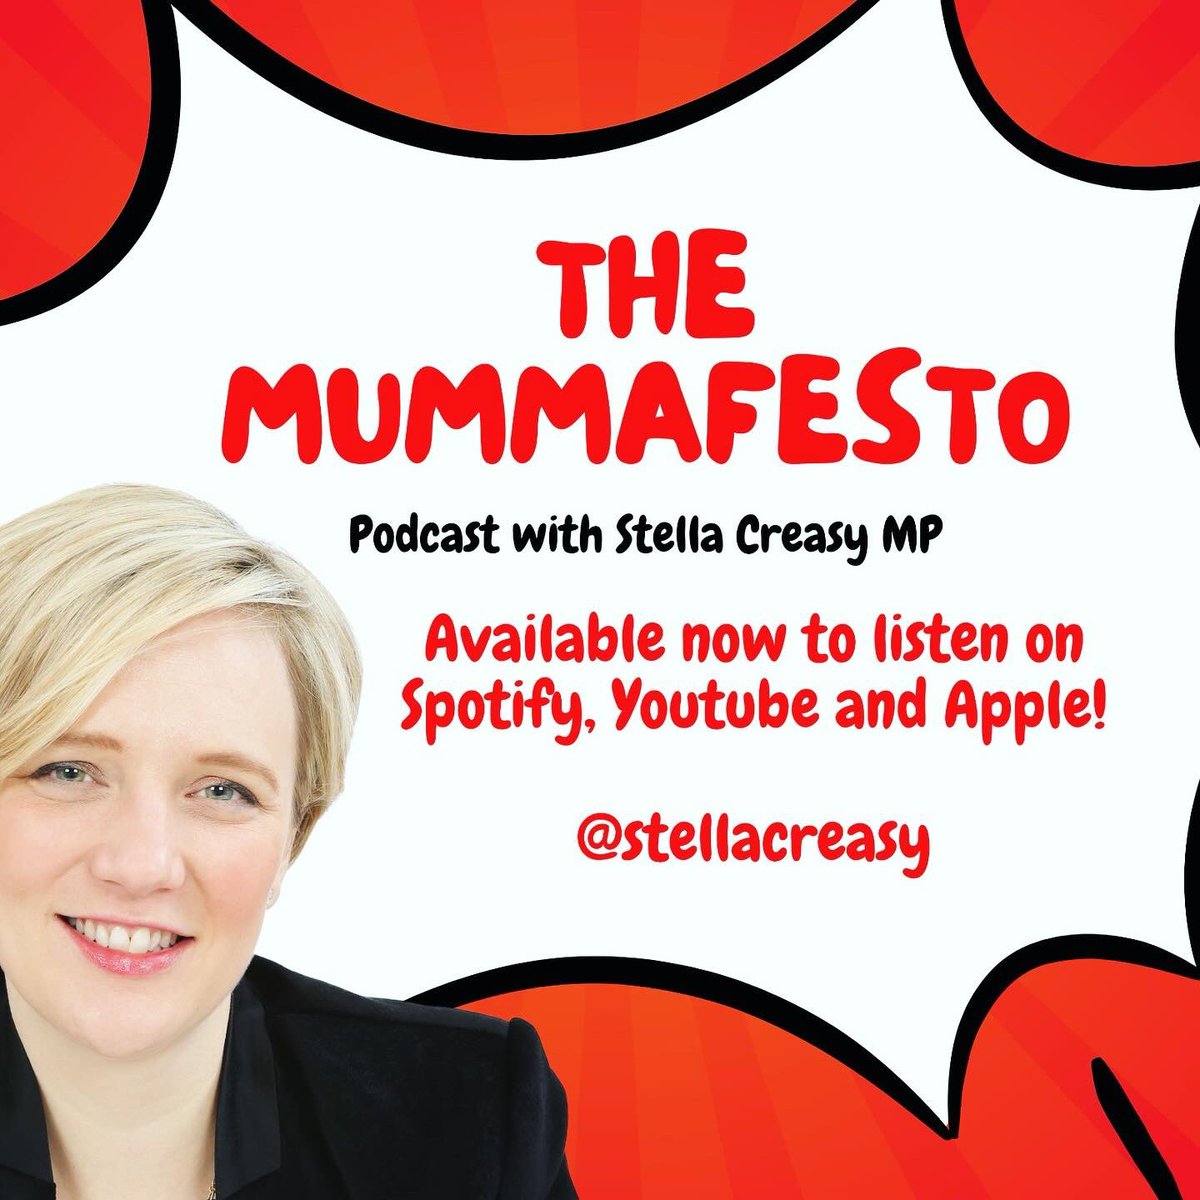 Find the link to listen to the #mummafesto podcast series on Apple here: podcasts.apple.com/gb/podcast/the… or Spotify here: open.spotify.com/show/4e2heePMy… - 
let me know in the comments who you want us to feature next! 👇